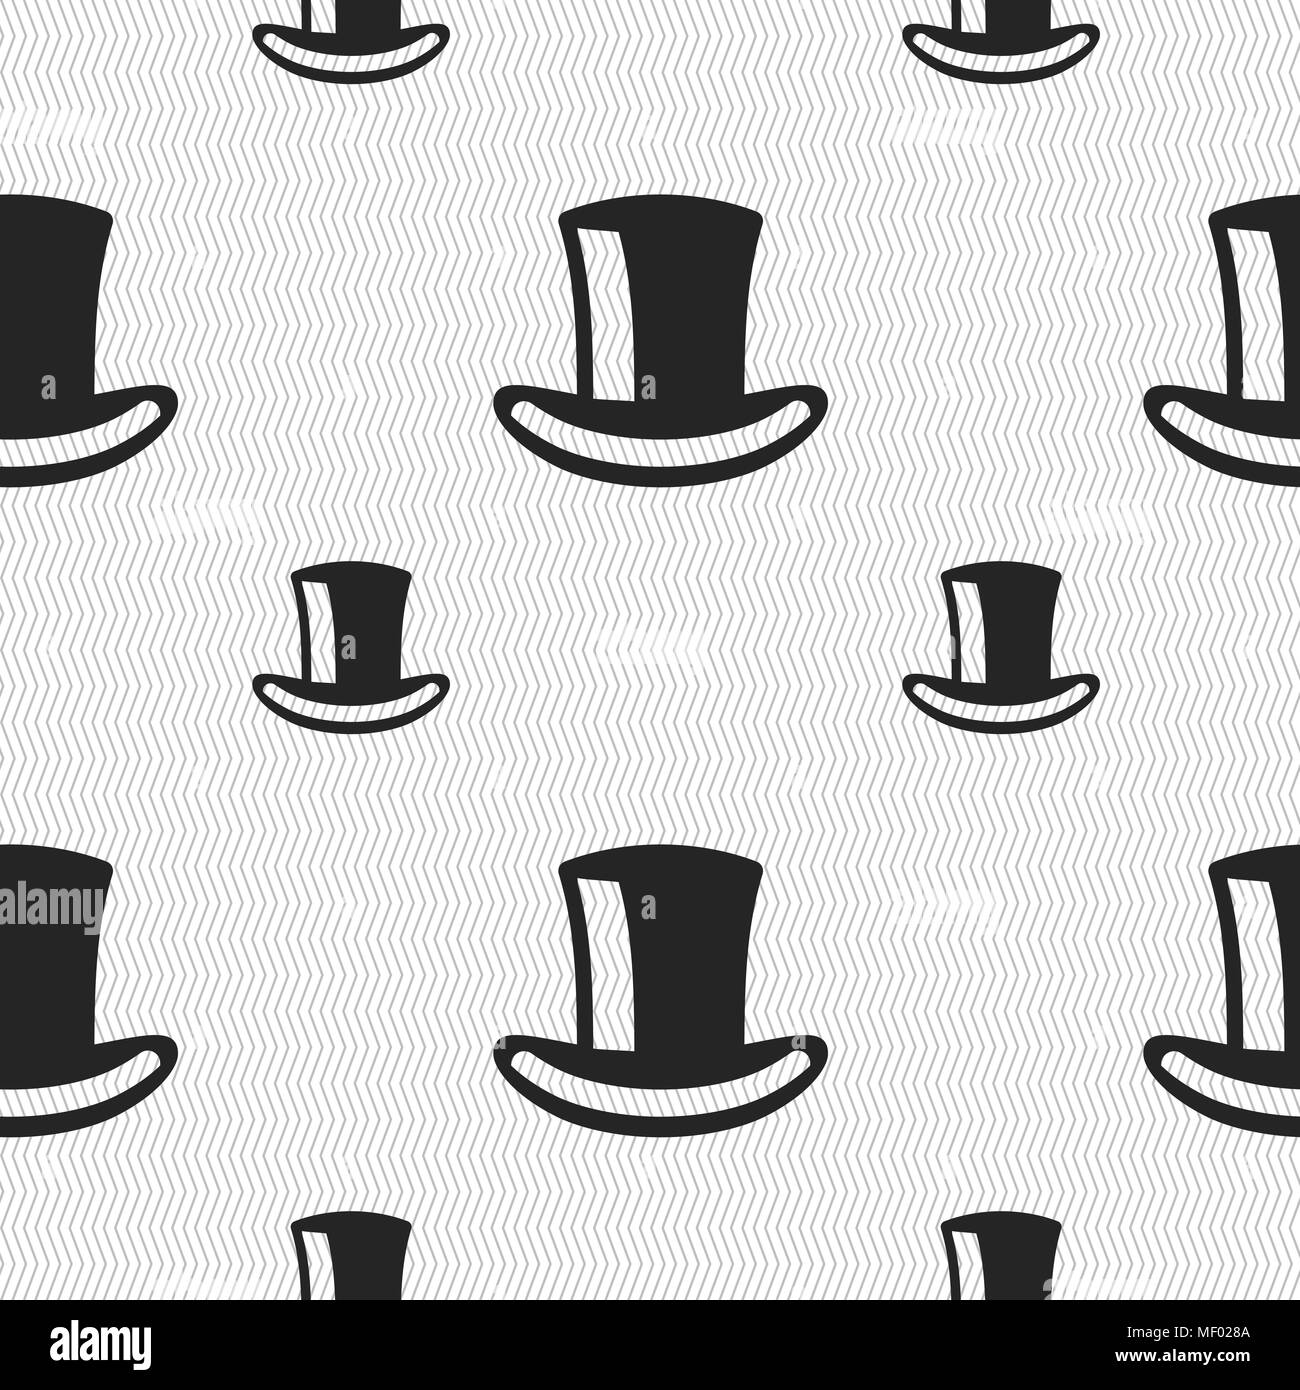 cylinder hat icon sign. Seamless pattern with geometric texture. Vector ...